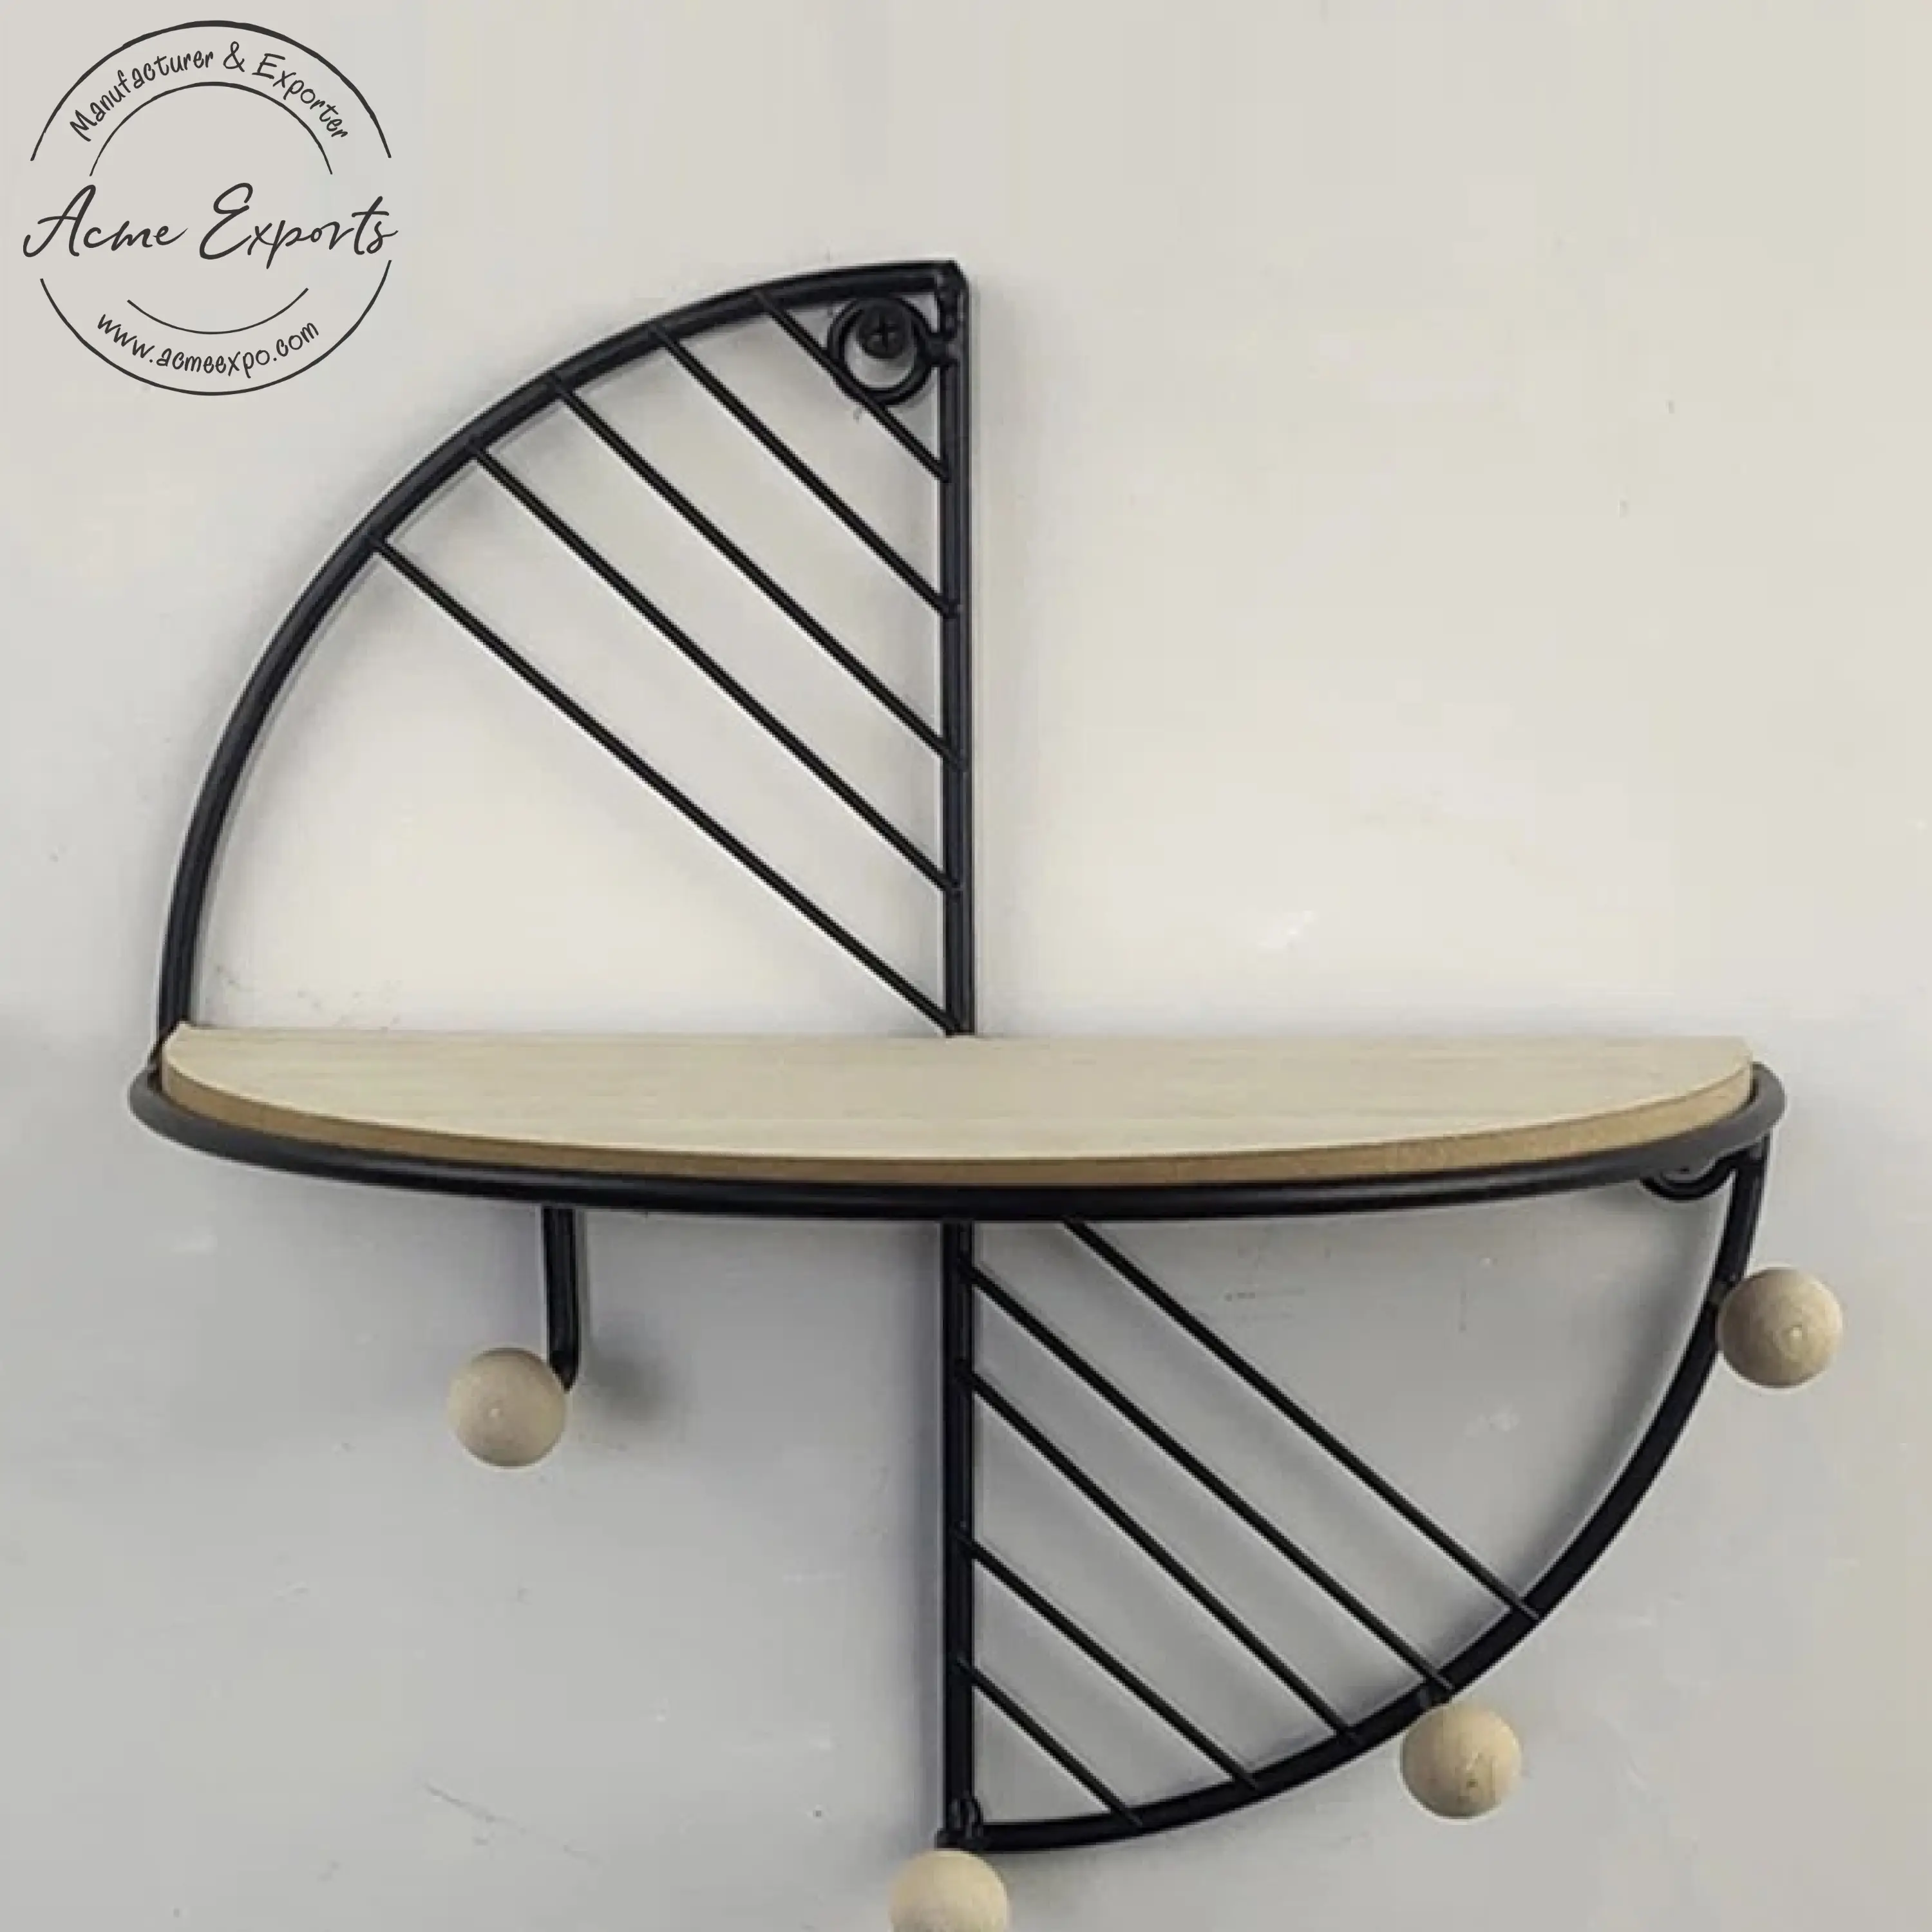 Creative Modern Small Wall Mounted Iron Wall Shelf with Black Powder Coated Finished Used for Bathroom Home and Interior Decor.